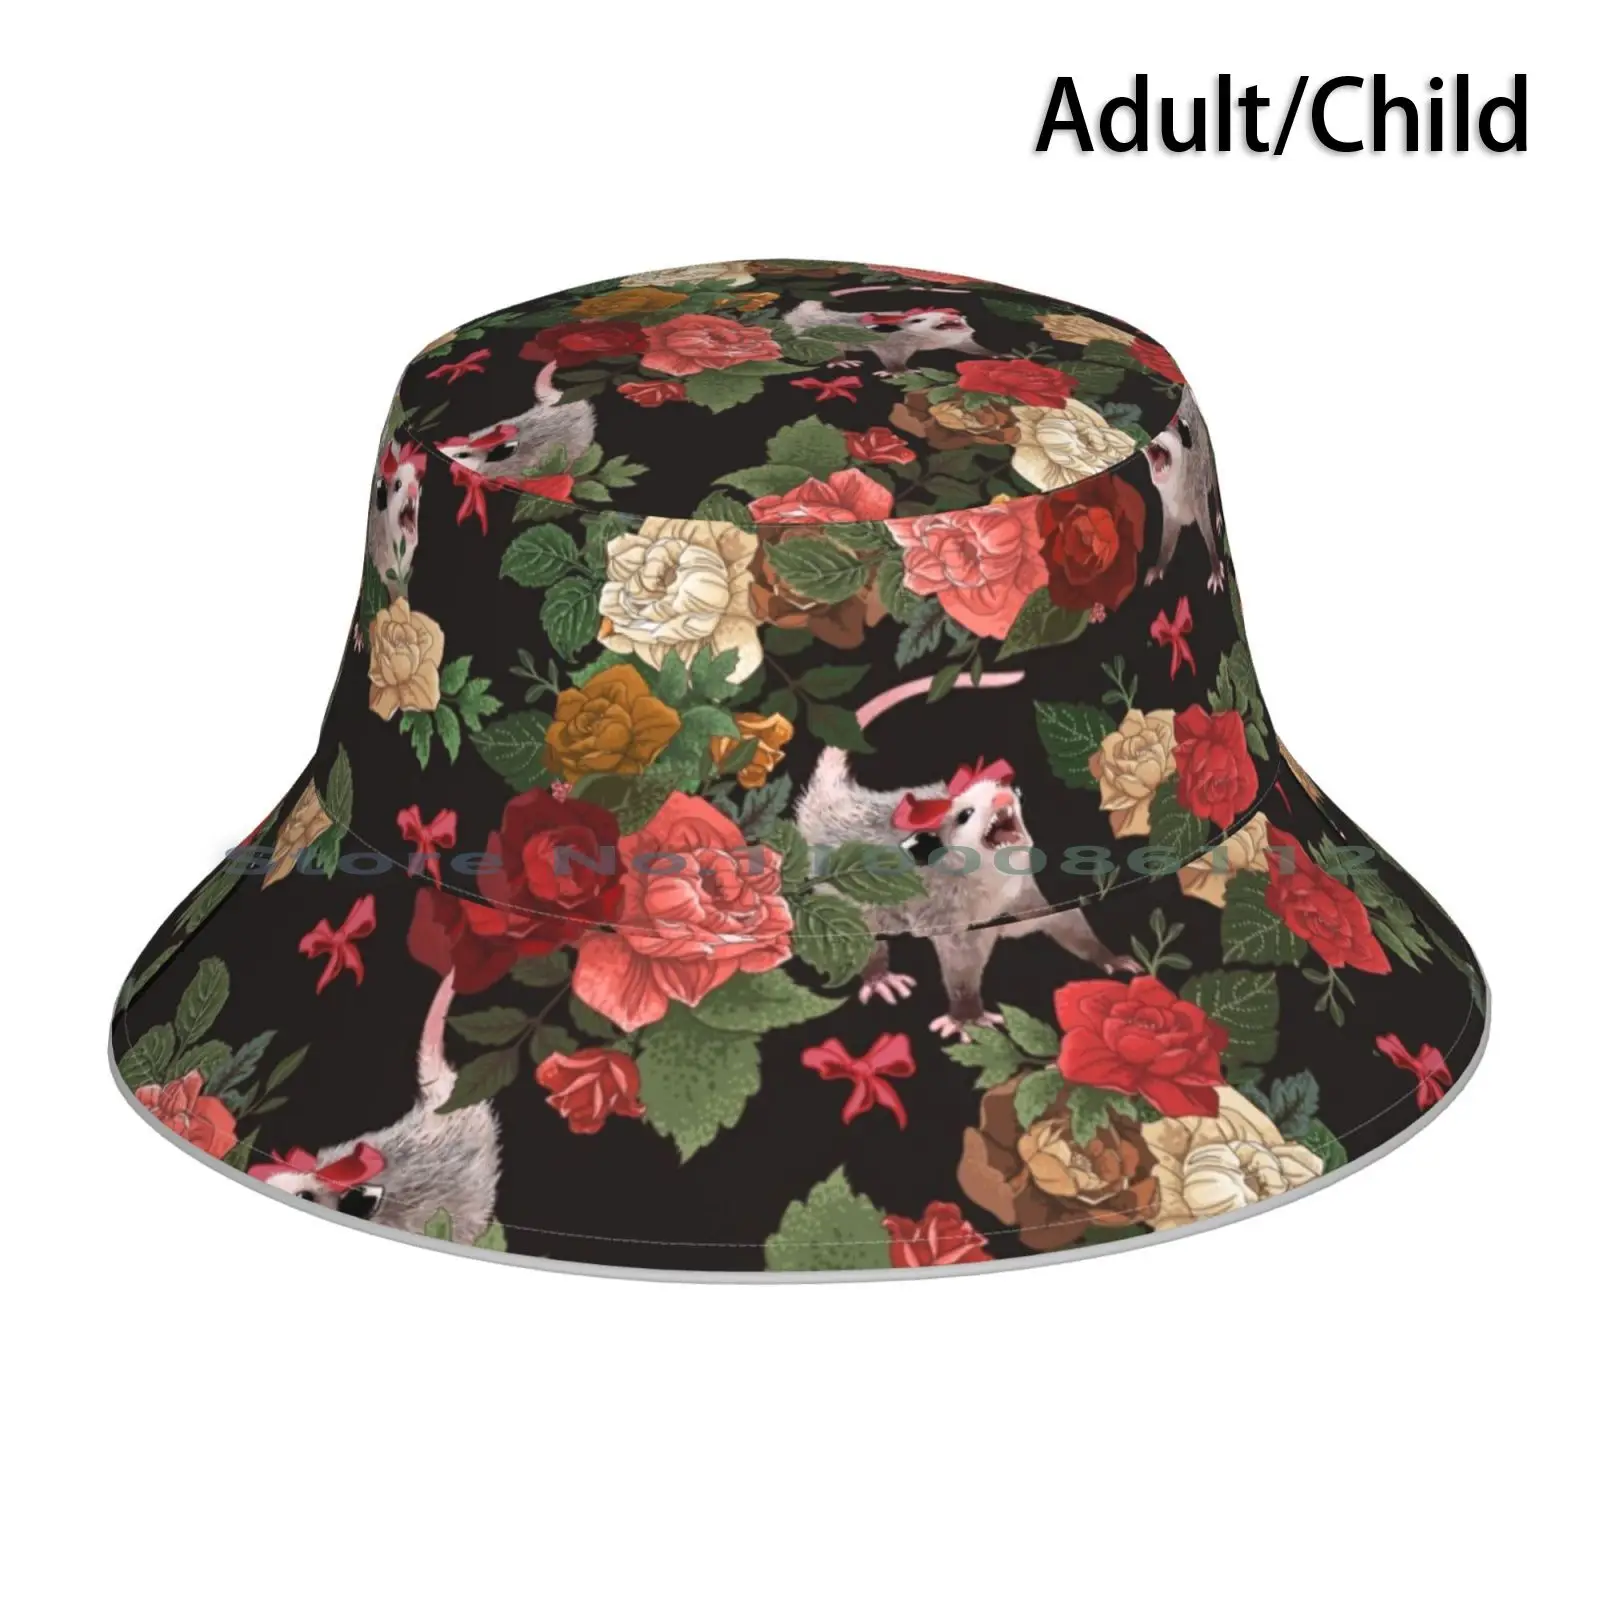 

Opossum Floral Pattern Bucket Hat Sun Cap Floral Flower Pattern Repetition Opossum Meme Animals Cute Funny Weird Silly Humor